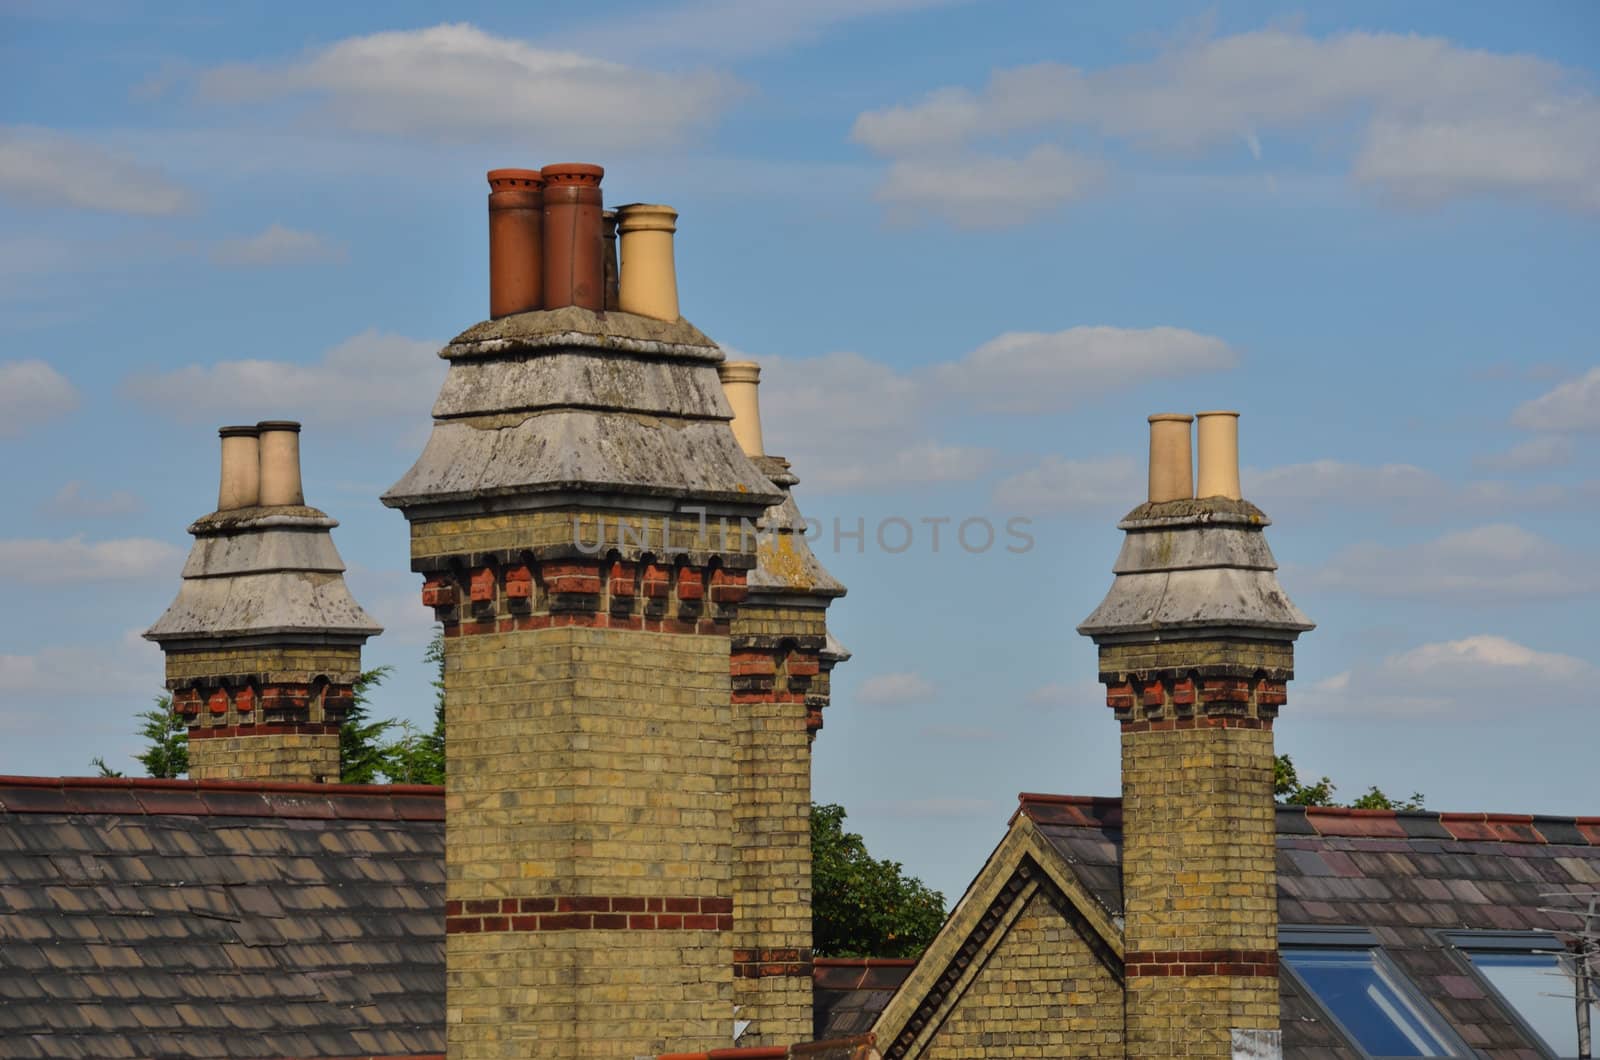 Group of old residential chimneys